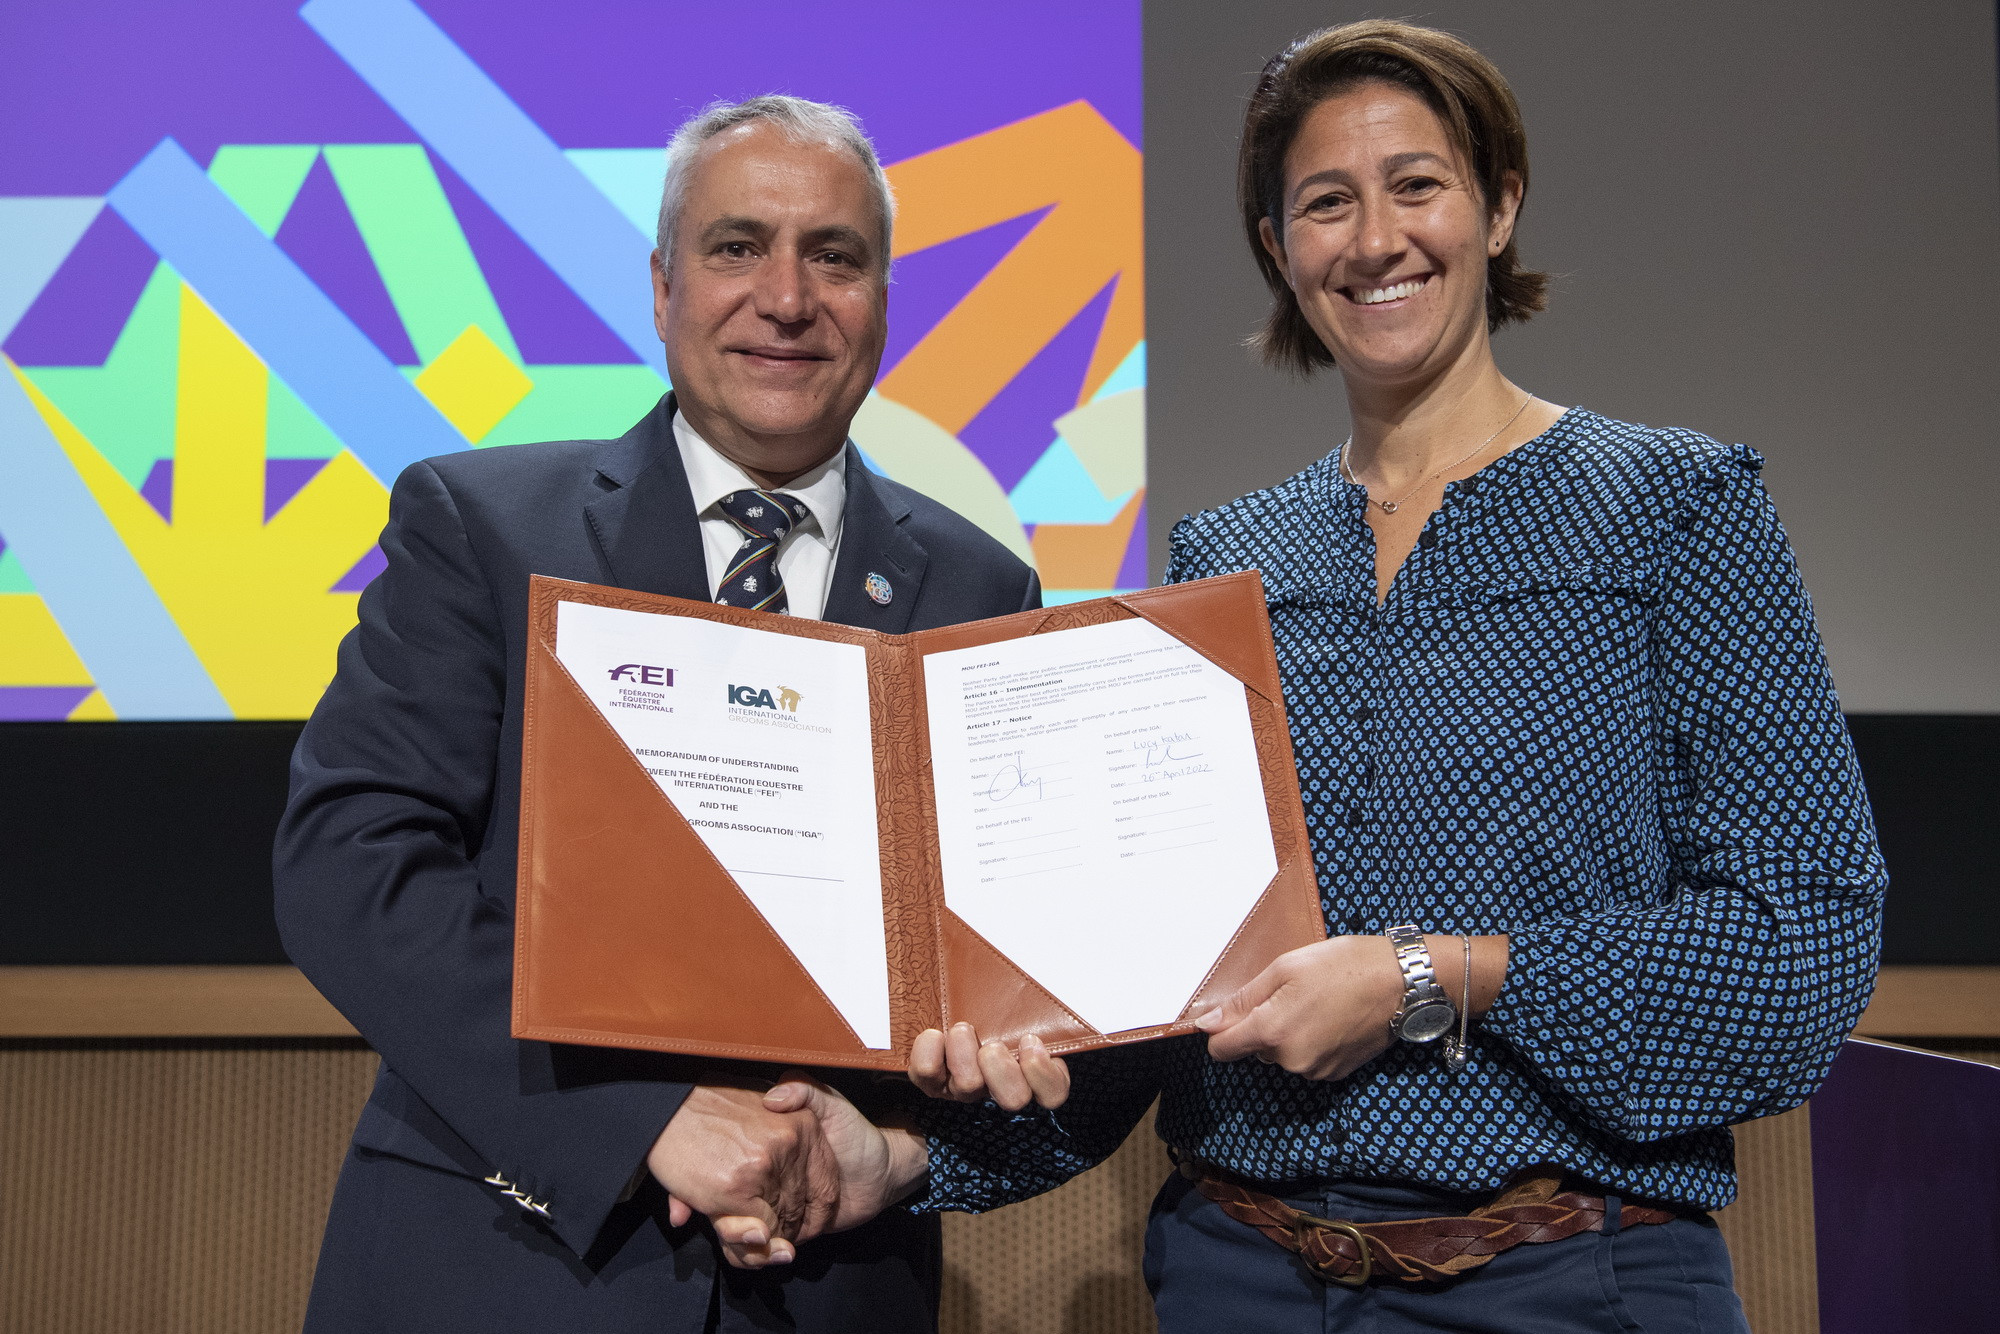 FEI President Ingmar De Vos and Lucy Katan, founding director of the International Grooms Association, have signed a Memorandum of Understanding (MoU) during the FEI Sports Forum today ©FEI